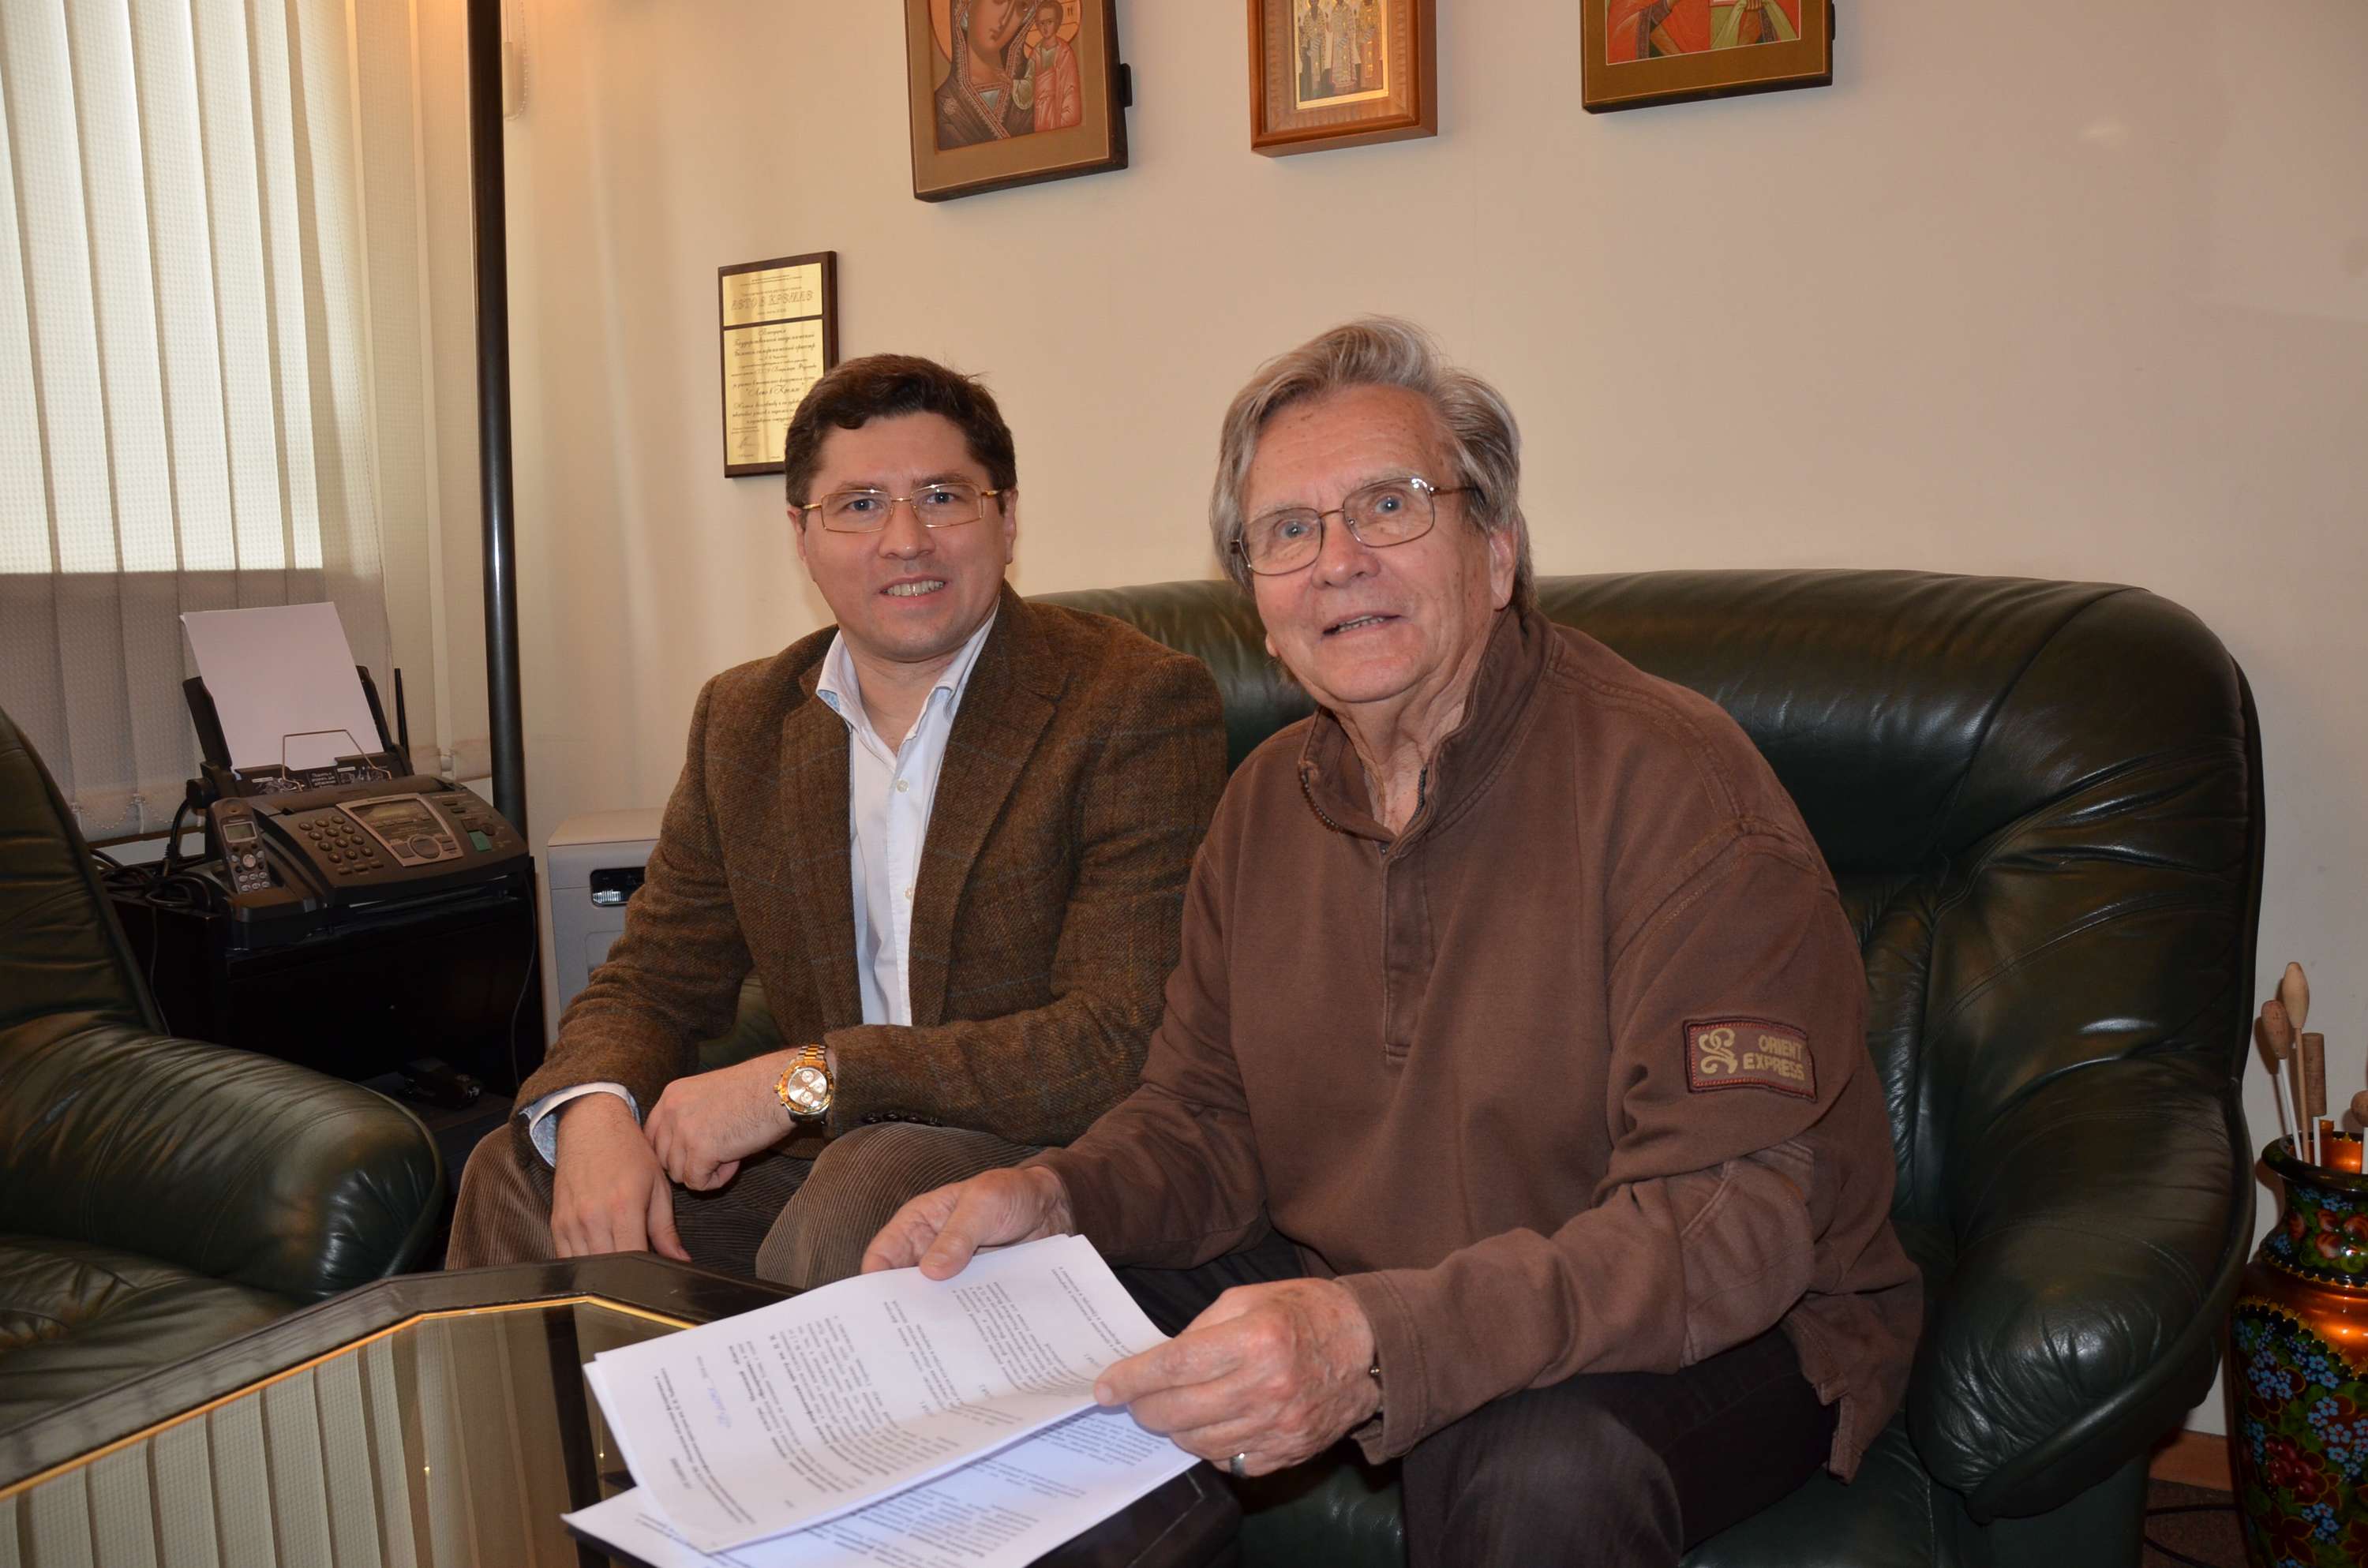 MRP and Tchaikovsky Orchestra: Collaboration Agreement